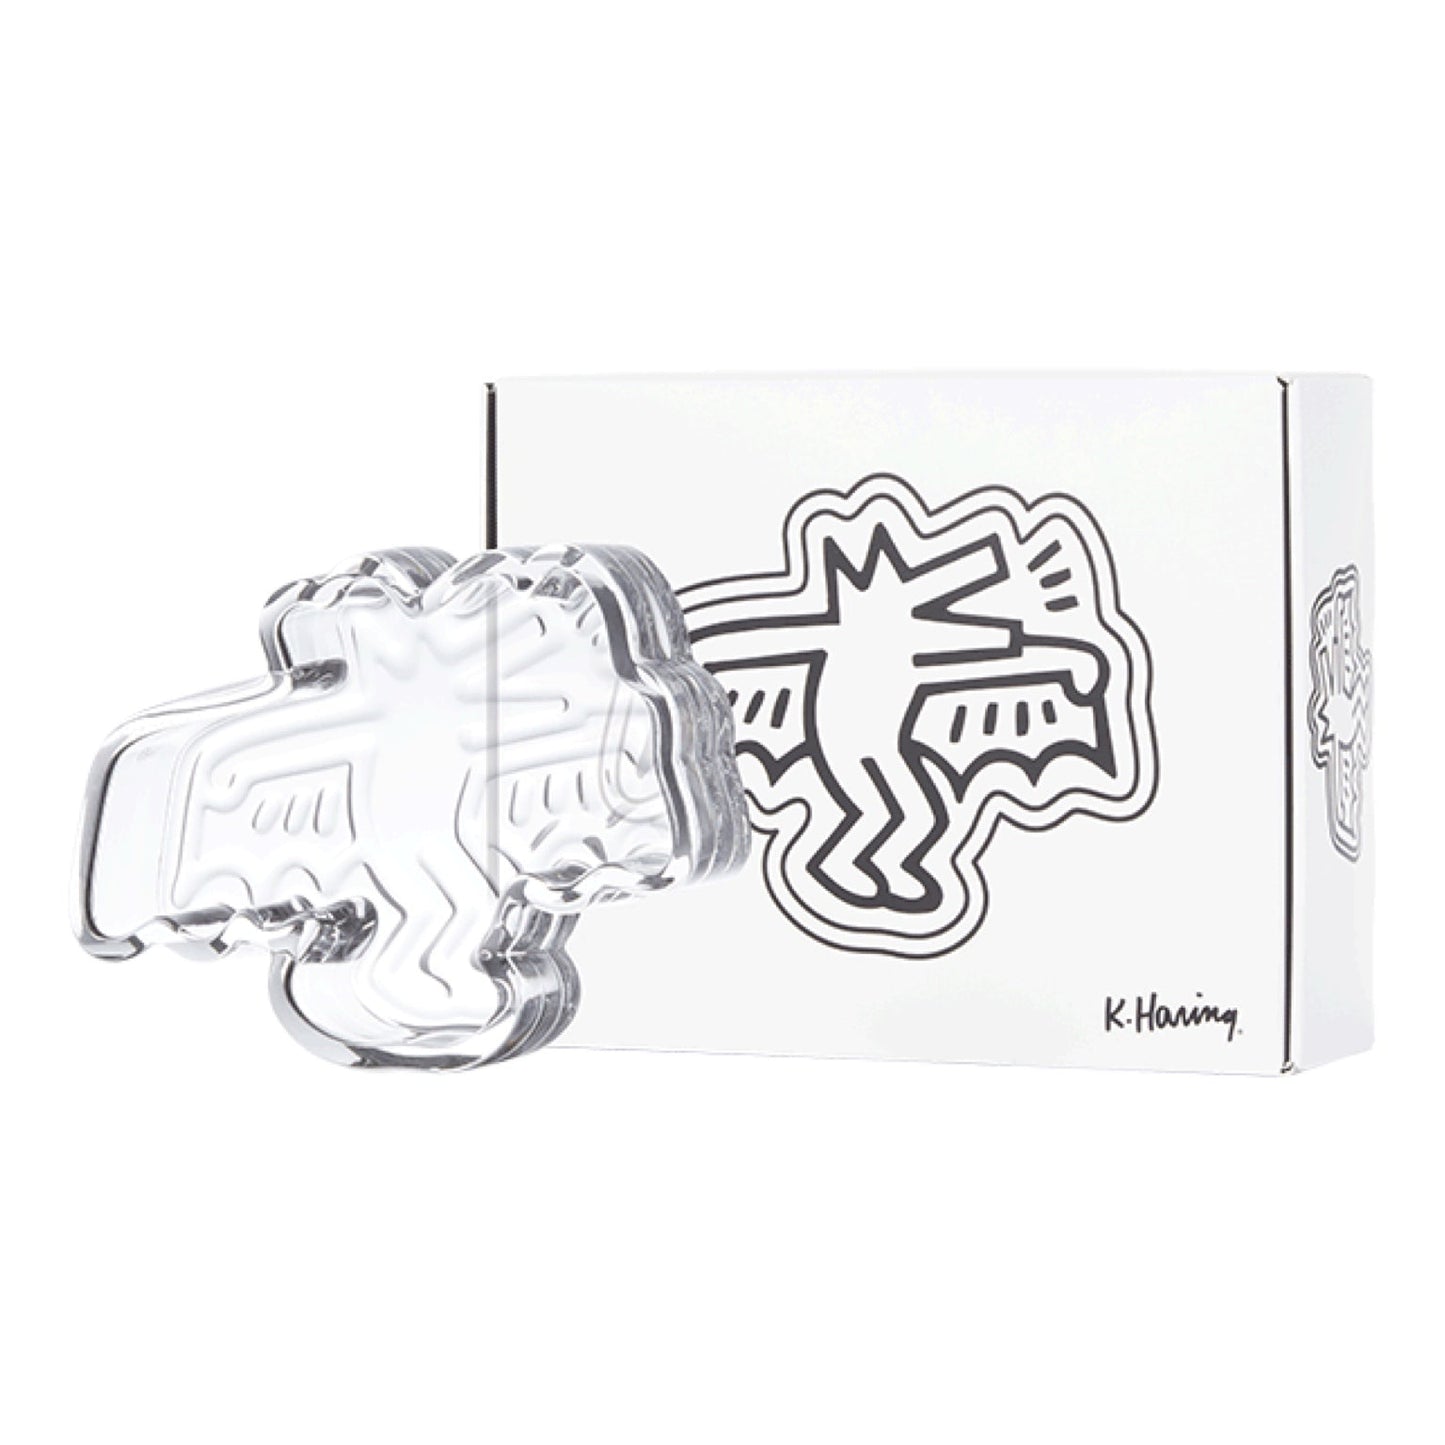 K. Haring “Dog Bat” Crystal Glass Catchall by K. Haring Collection | Mission Dispensary